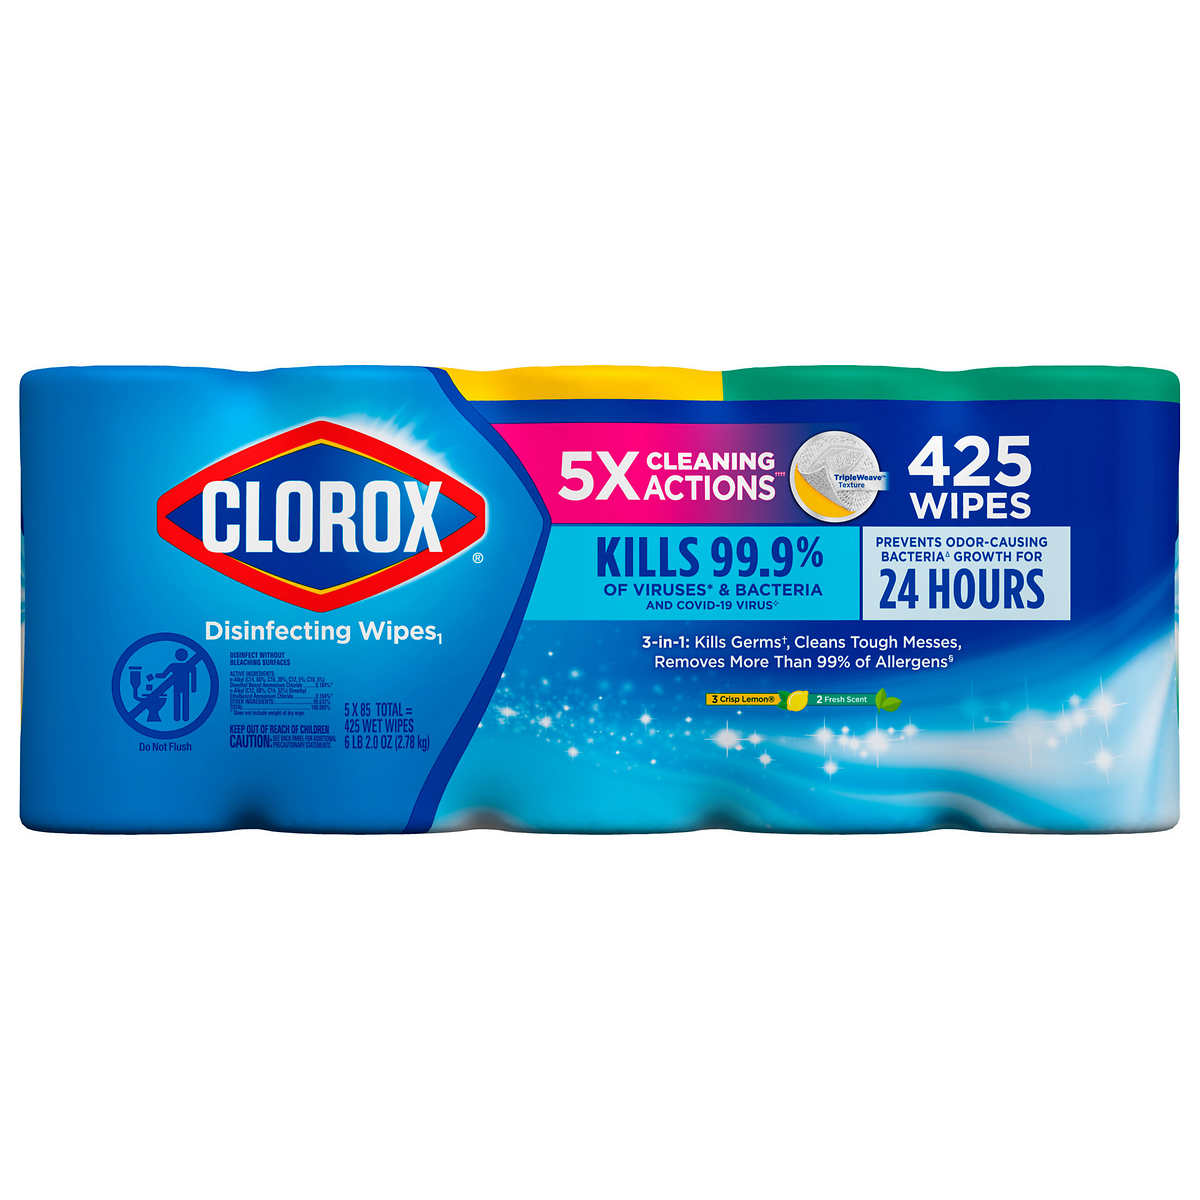 Clorox Disinfecting Wipes Variety Pack 85 Count 5 Pack